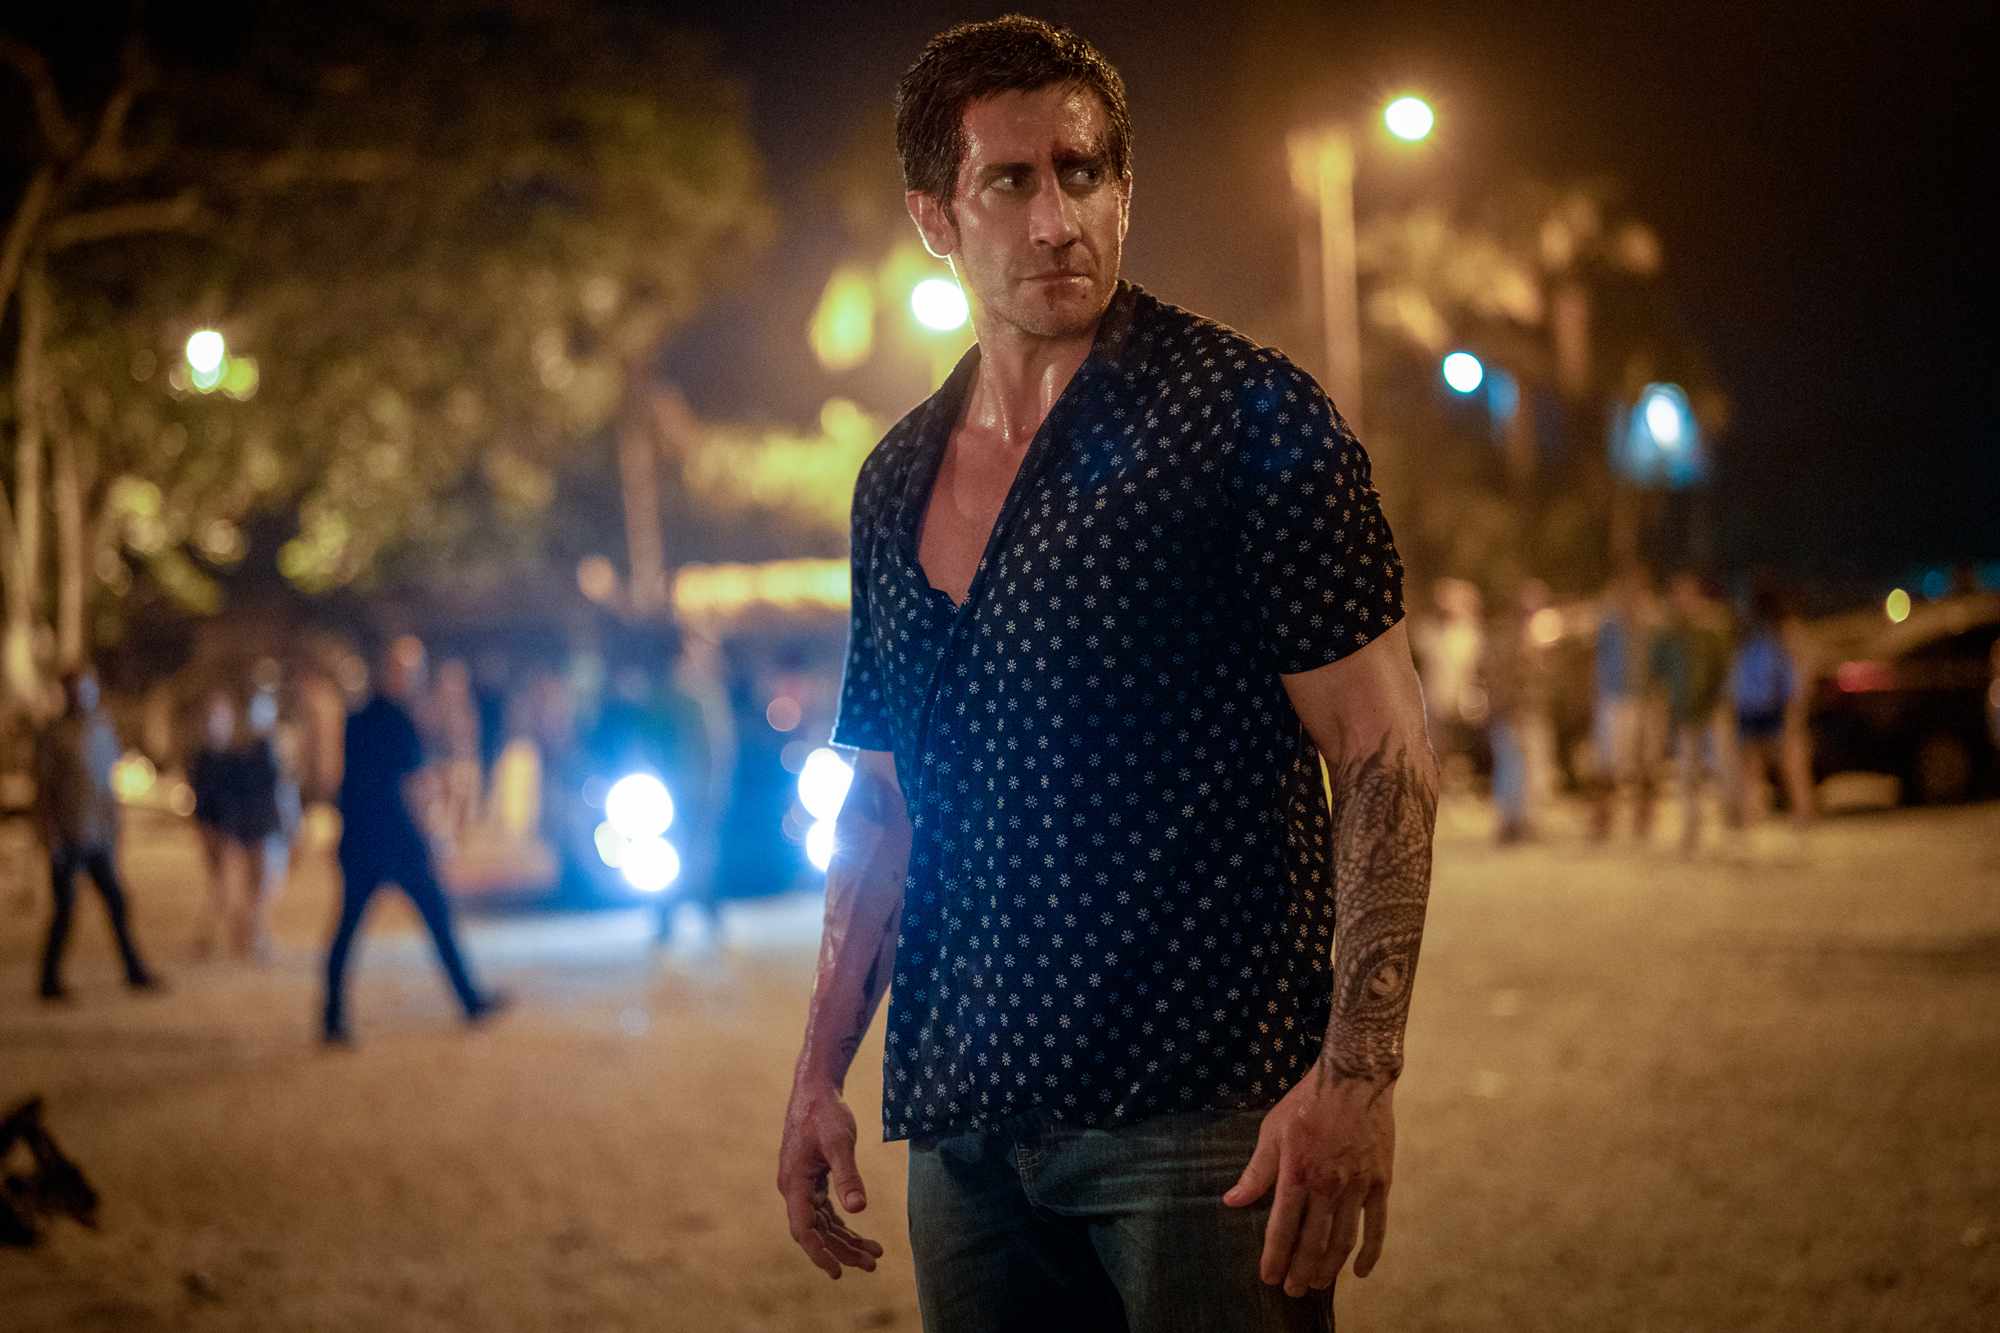 Jake Gyllenhaal Is Returning for a “Road House” Sequel After the Remake Becomes a Streaming Hit